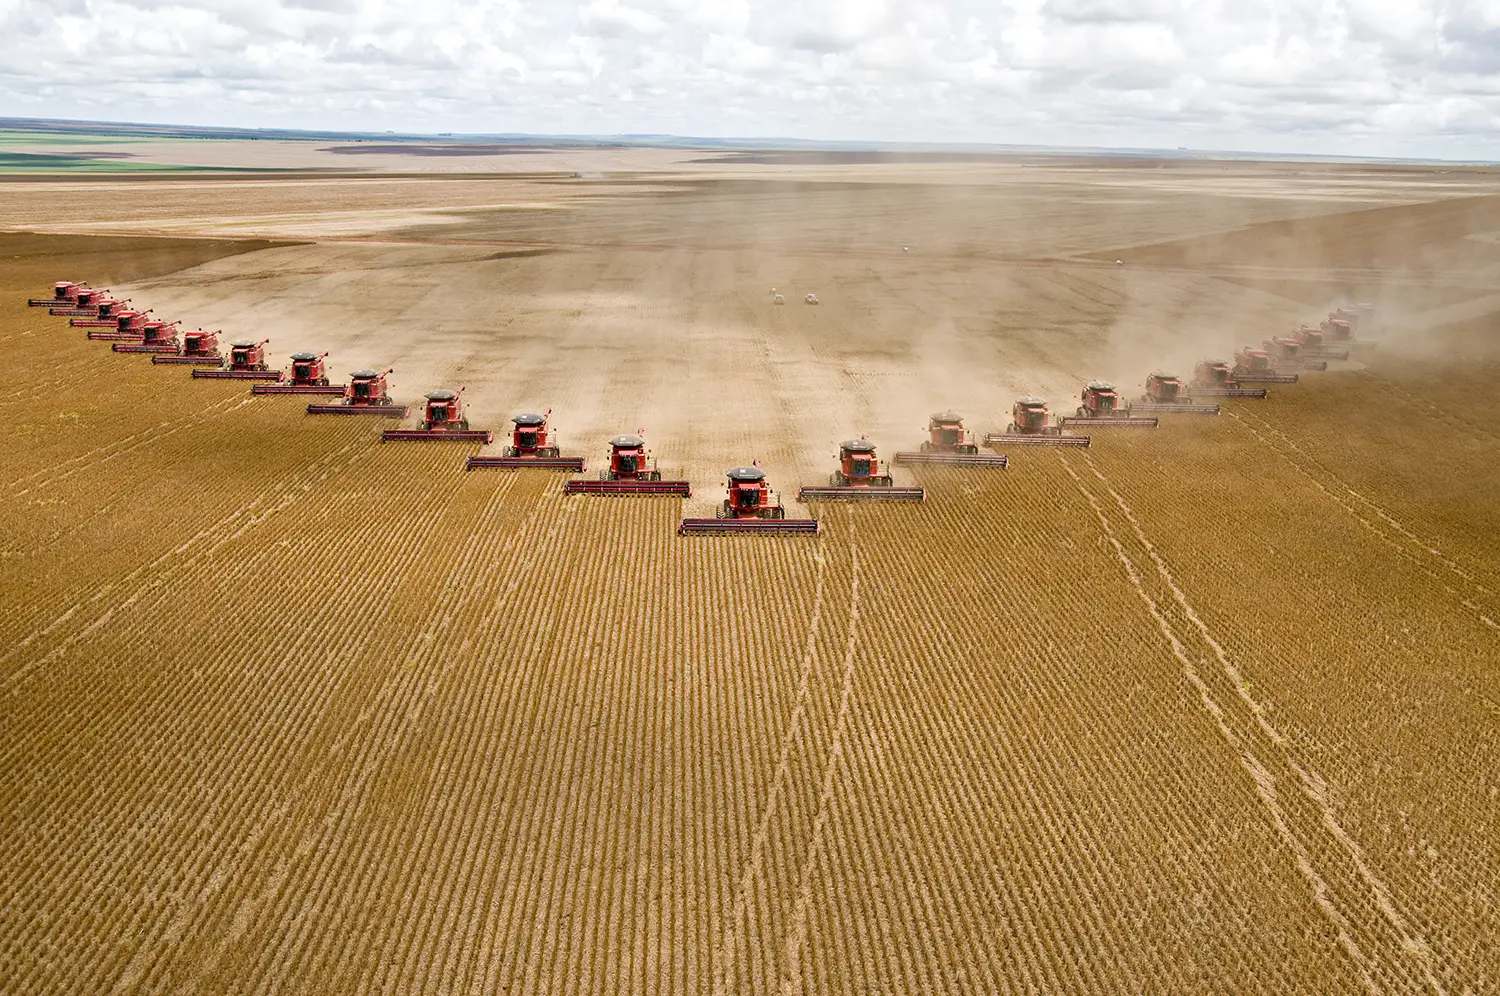 Aerial photograph of 25 combine harvesters driving in V formation across a soybean field.